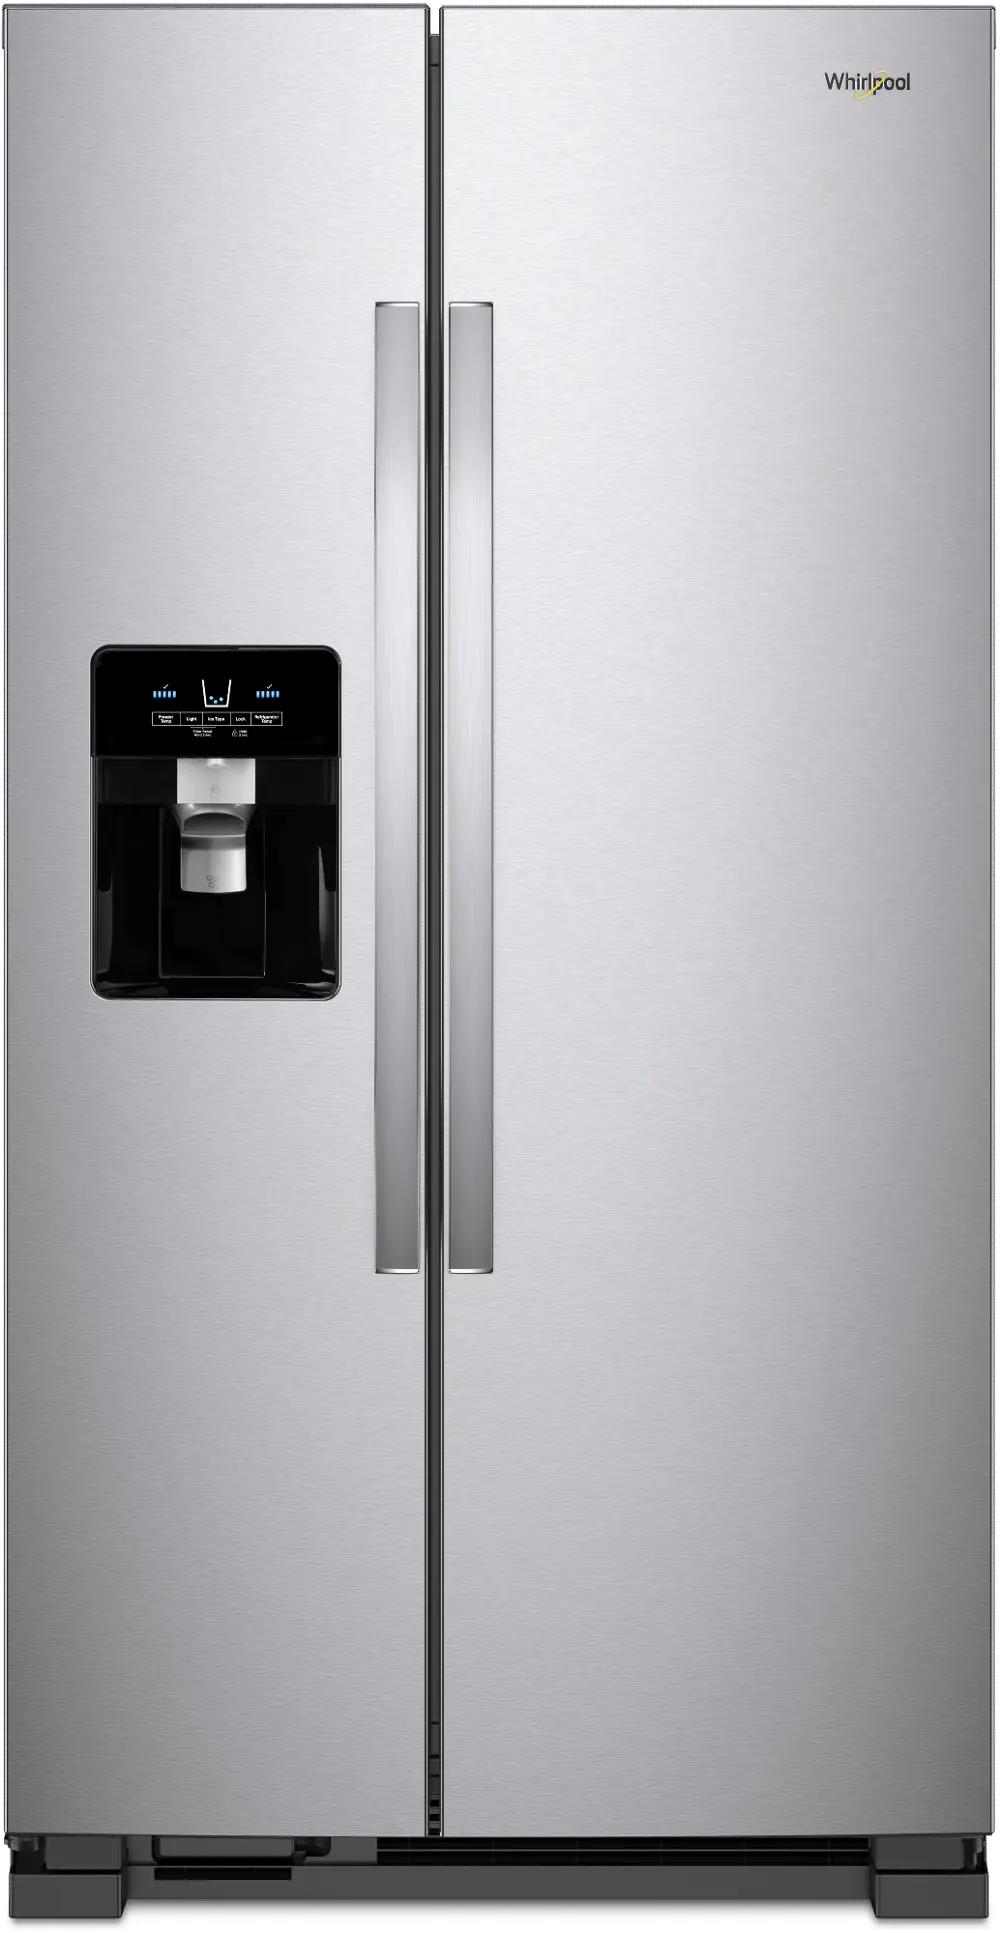 WRS325SDHZ Whirlpool 24.55 cu ft Side by Side Refrigerator - Stainless Steel-1